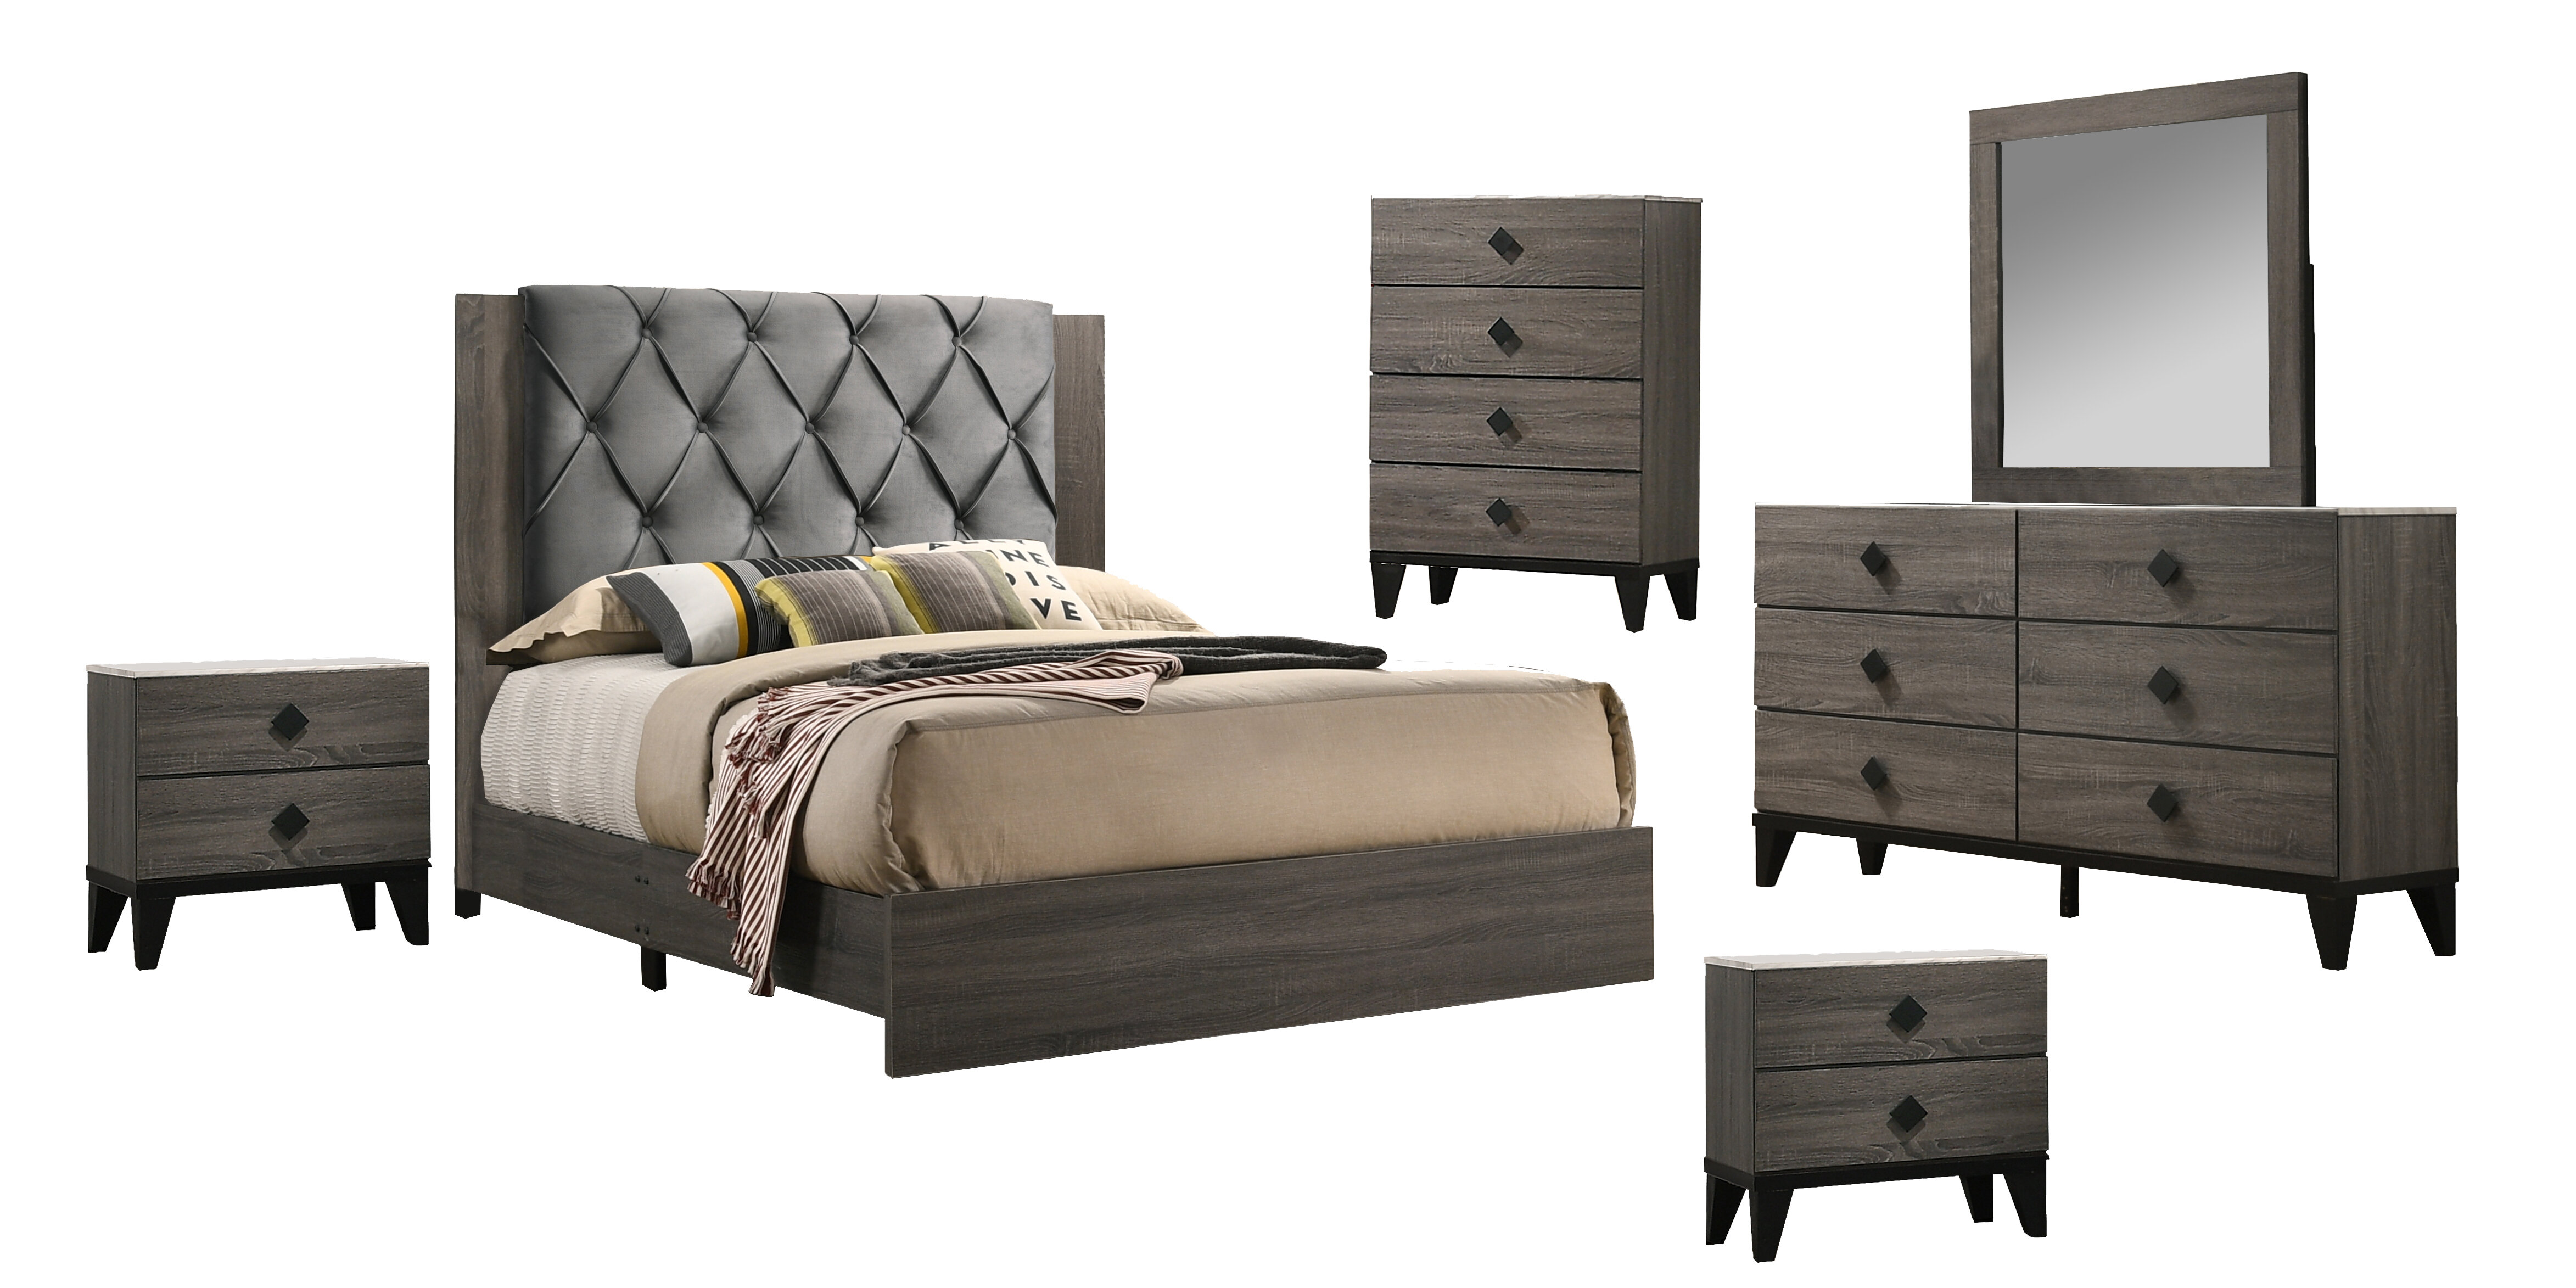 King Union Rustic Bedroom Sets You Ll Love In 2021 Wayfair